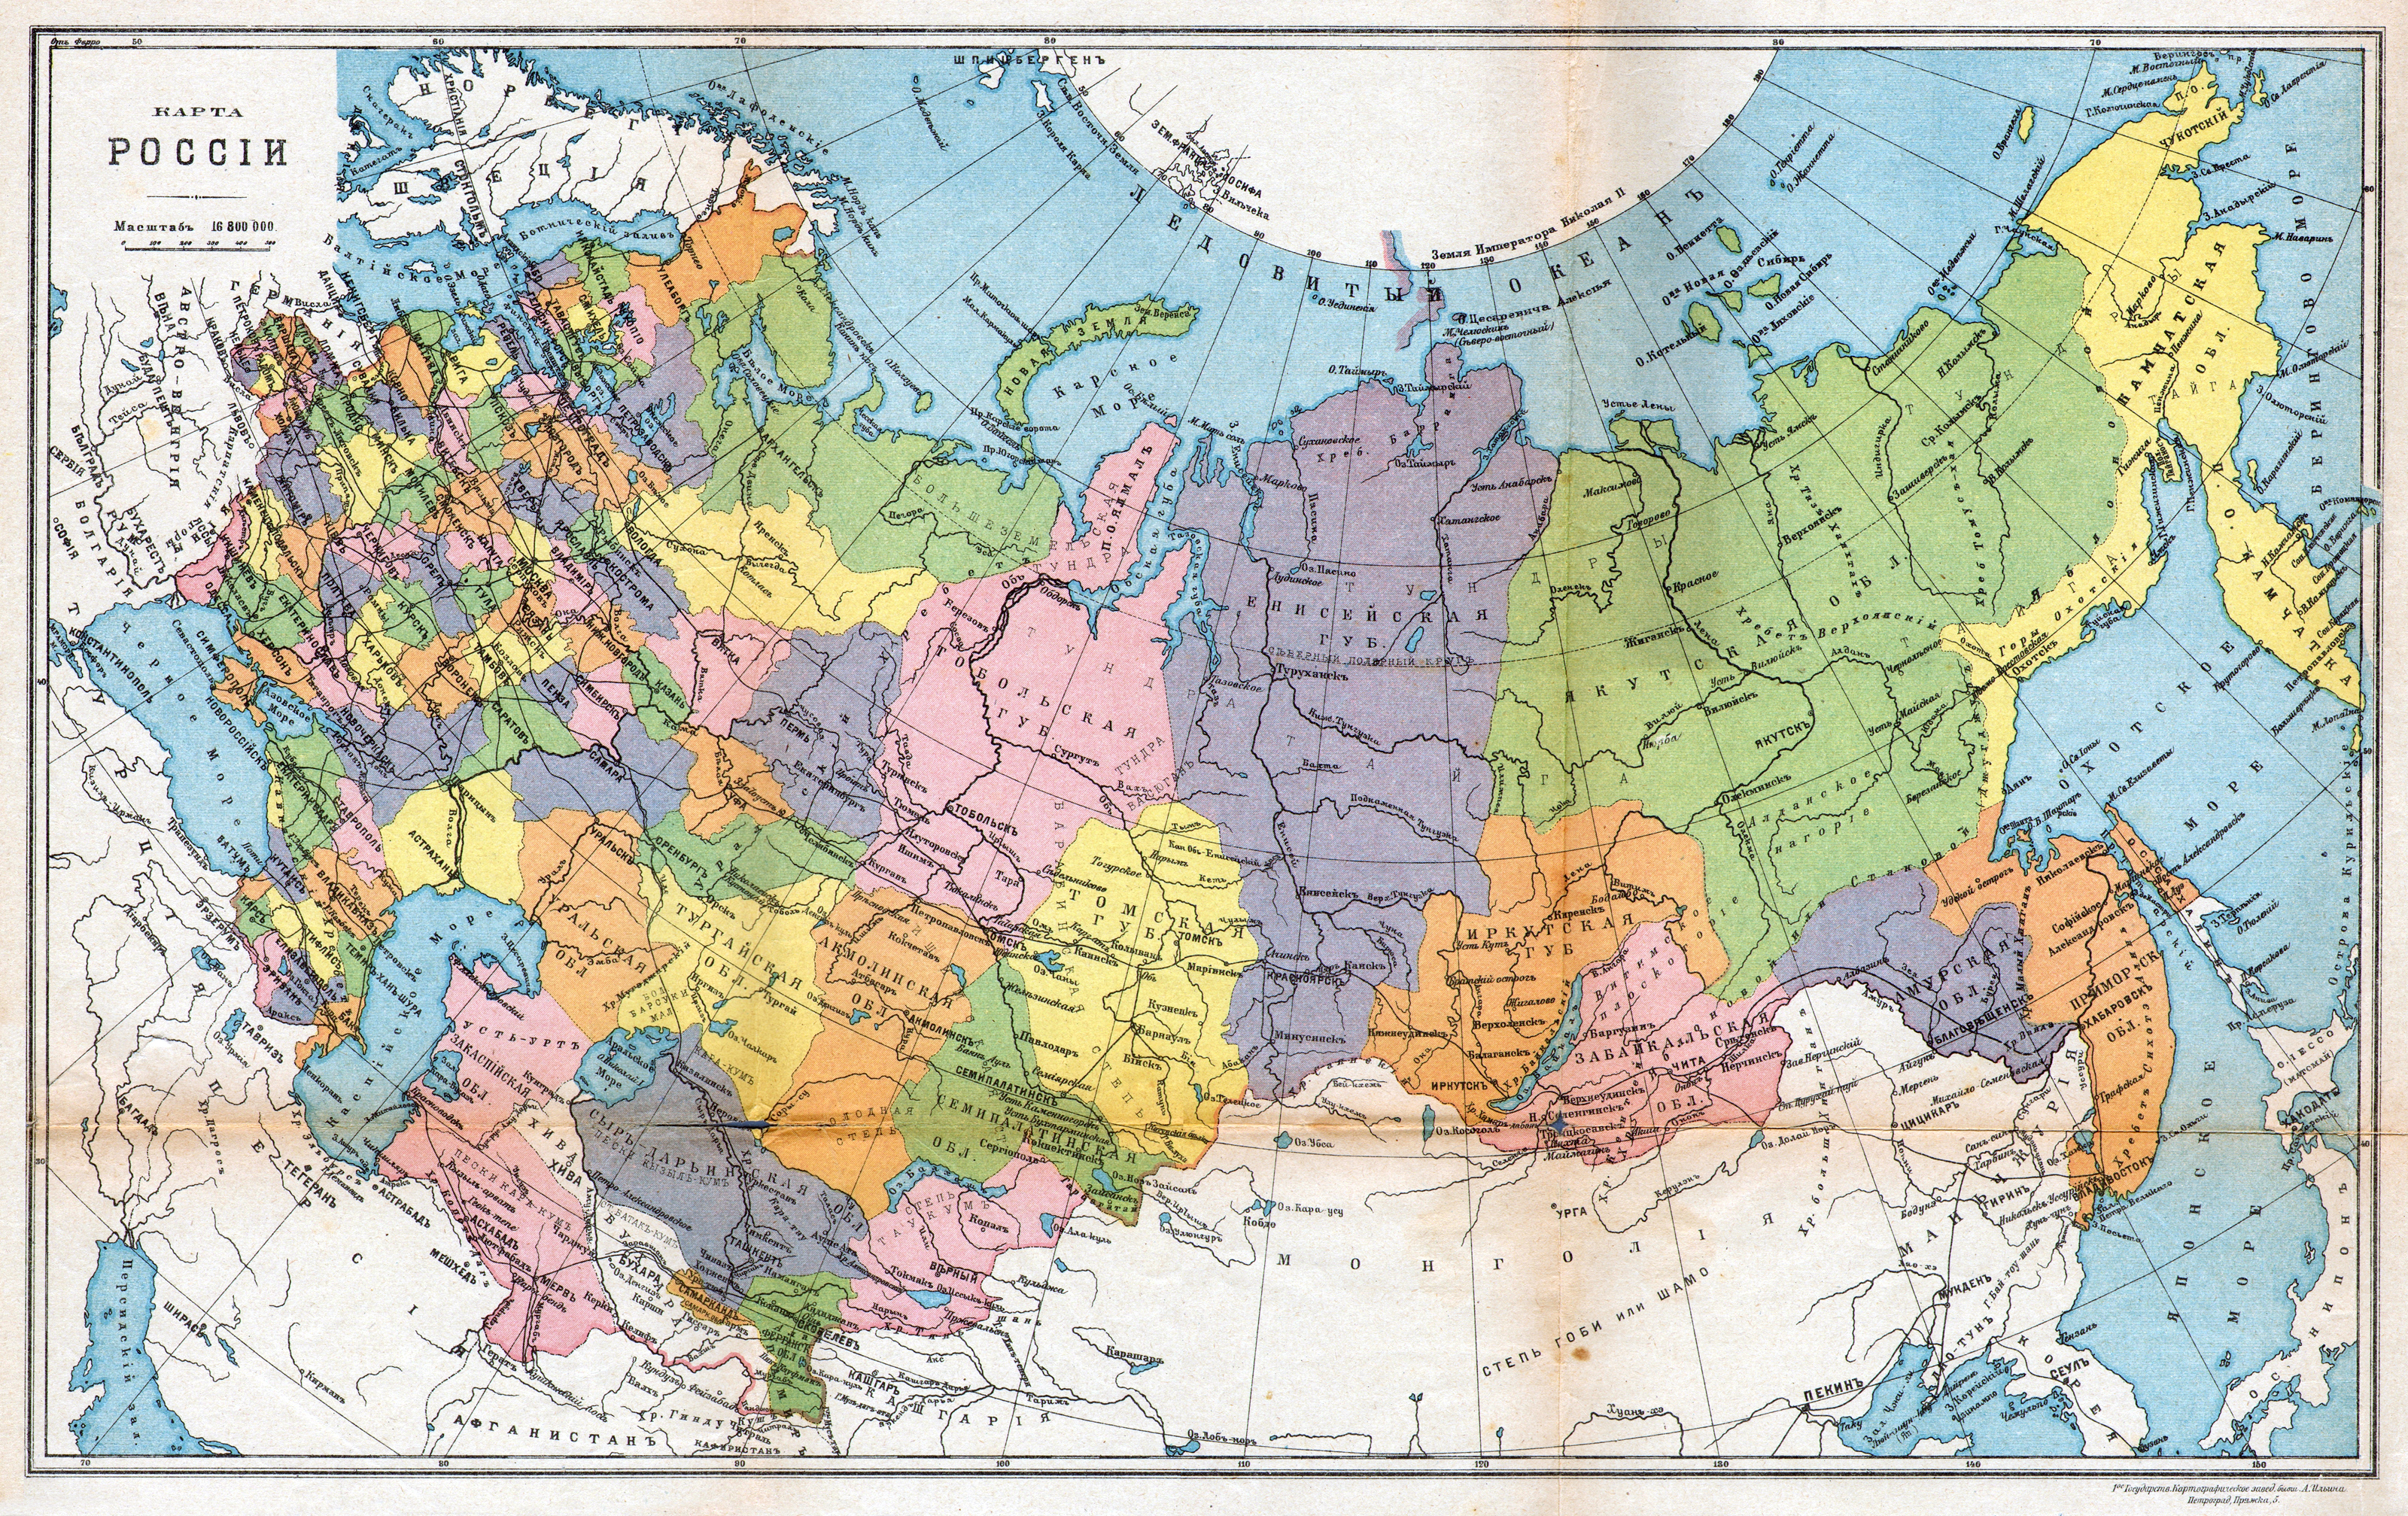 1917. Map of the Russia